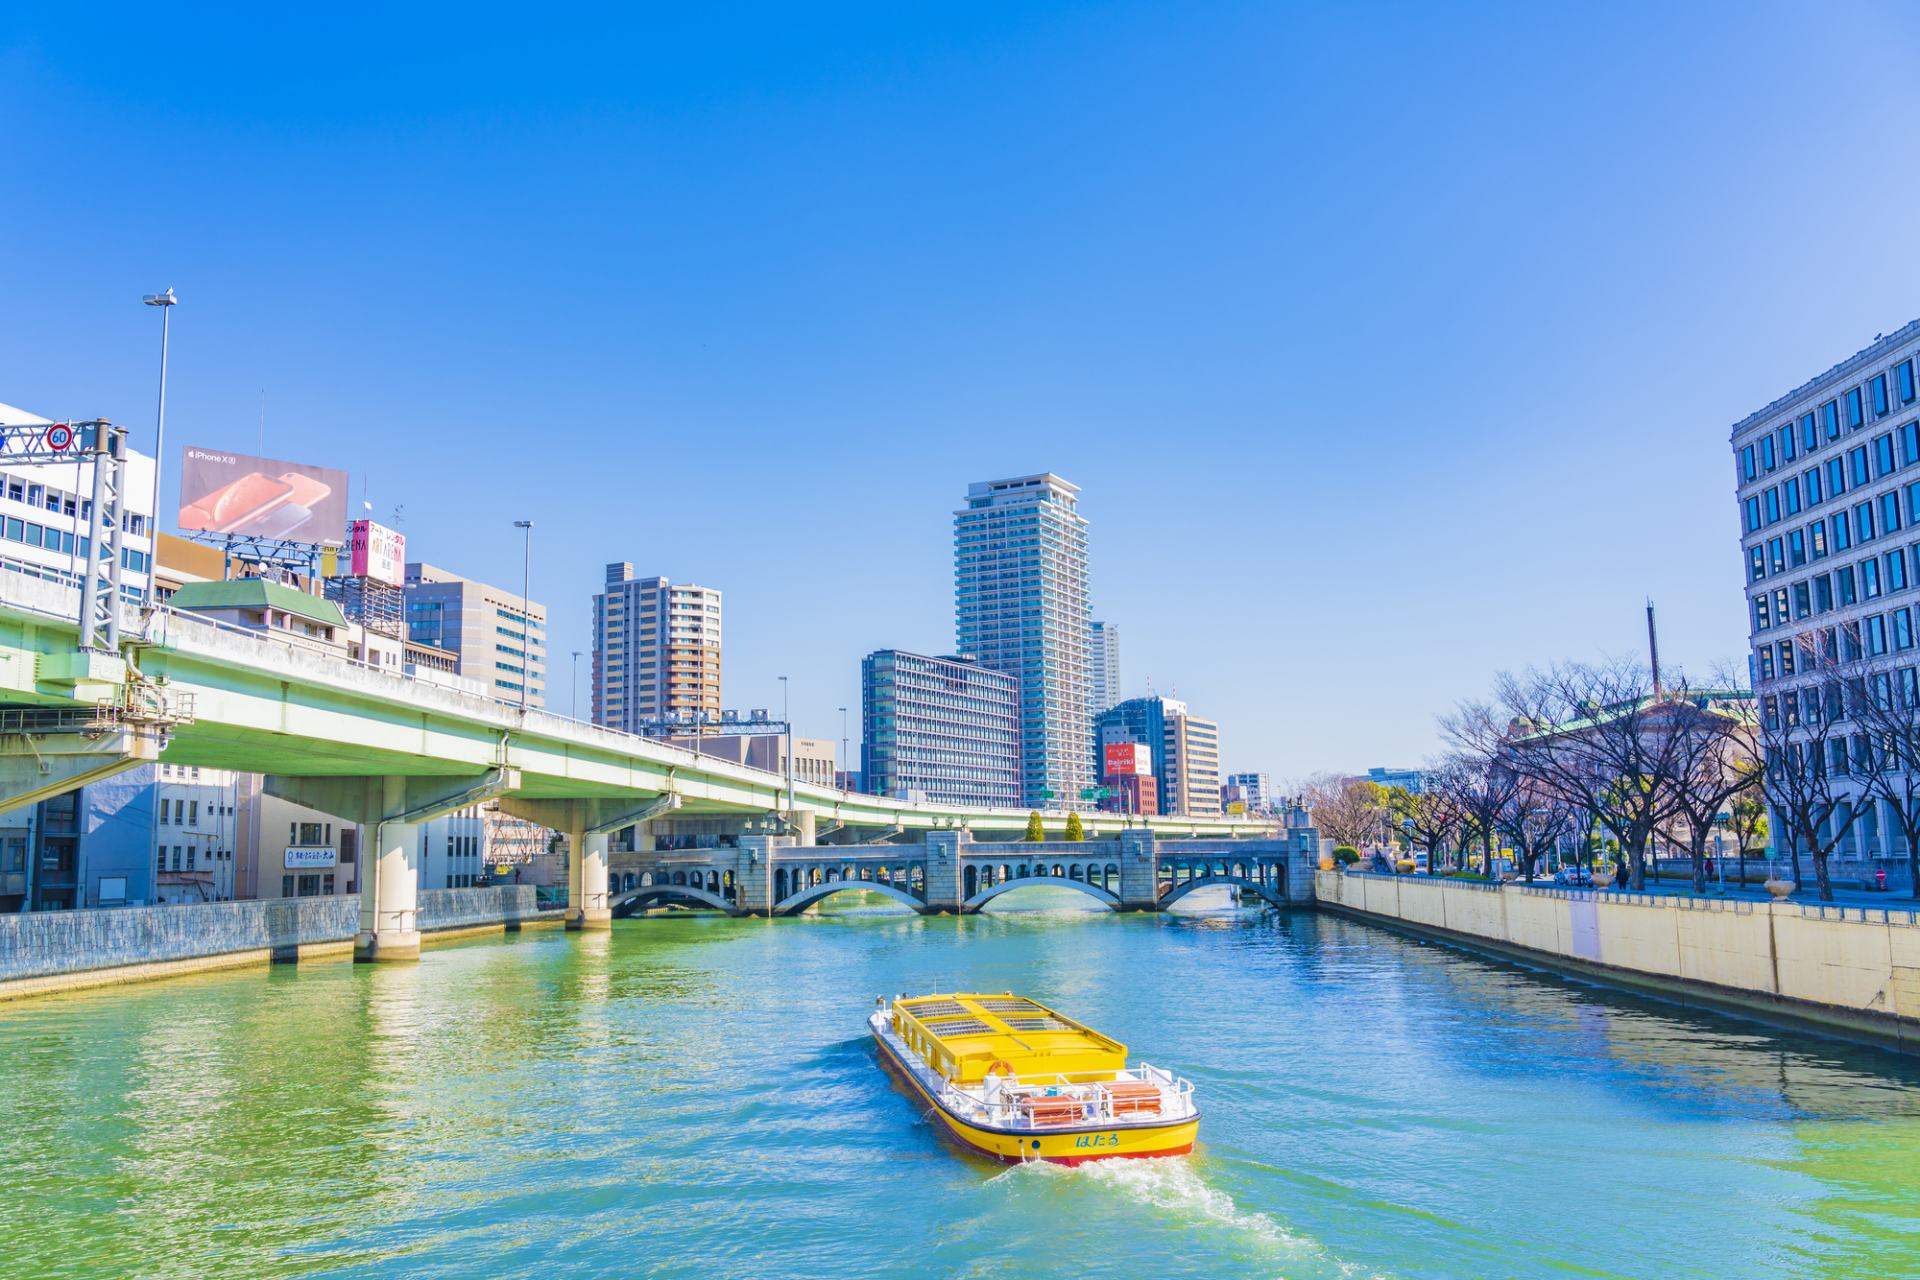 Nakanoshima is the land area sandwiched between Dojima and Tosabori Rivers. This scenic spot is known for the iconic Aqua Metropolis Osaka and picturesque streetscapes filled with worldly vibes, offices and high-rise complexes.